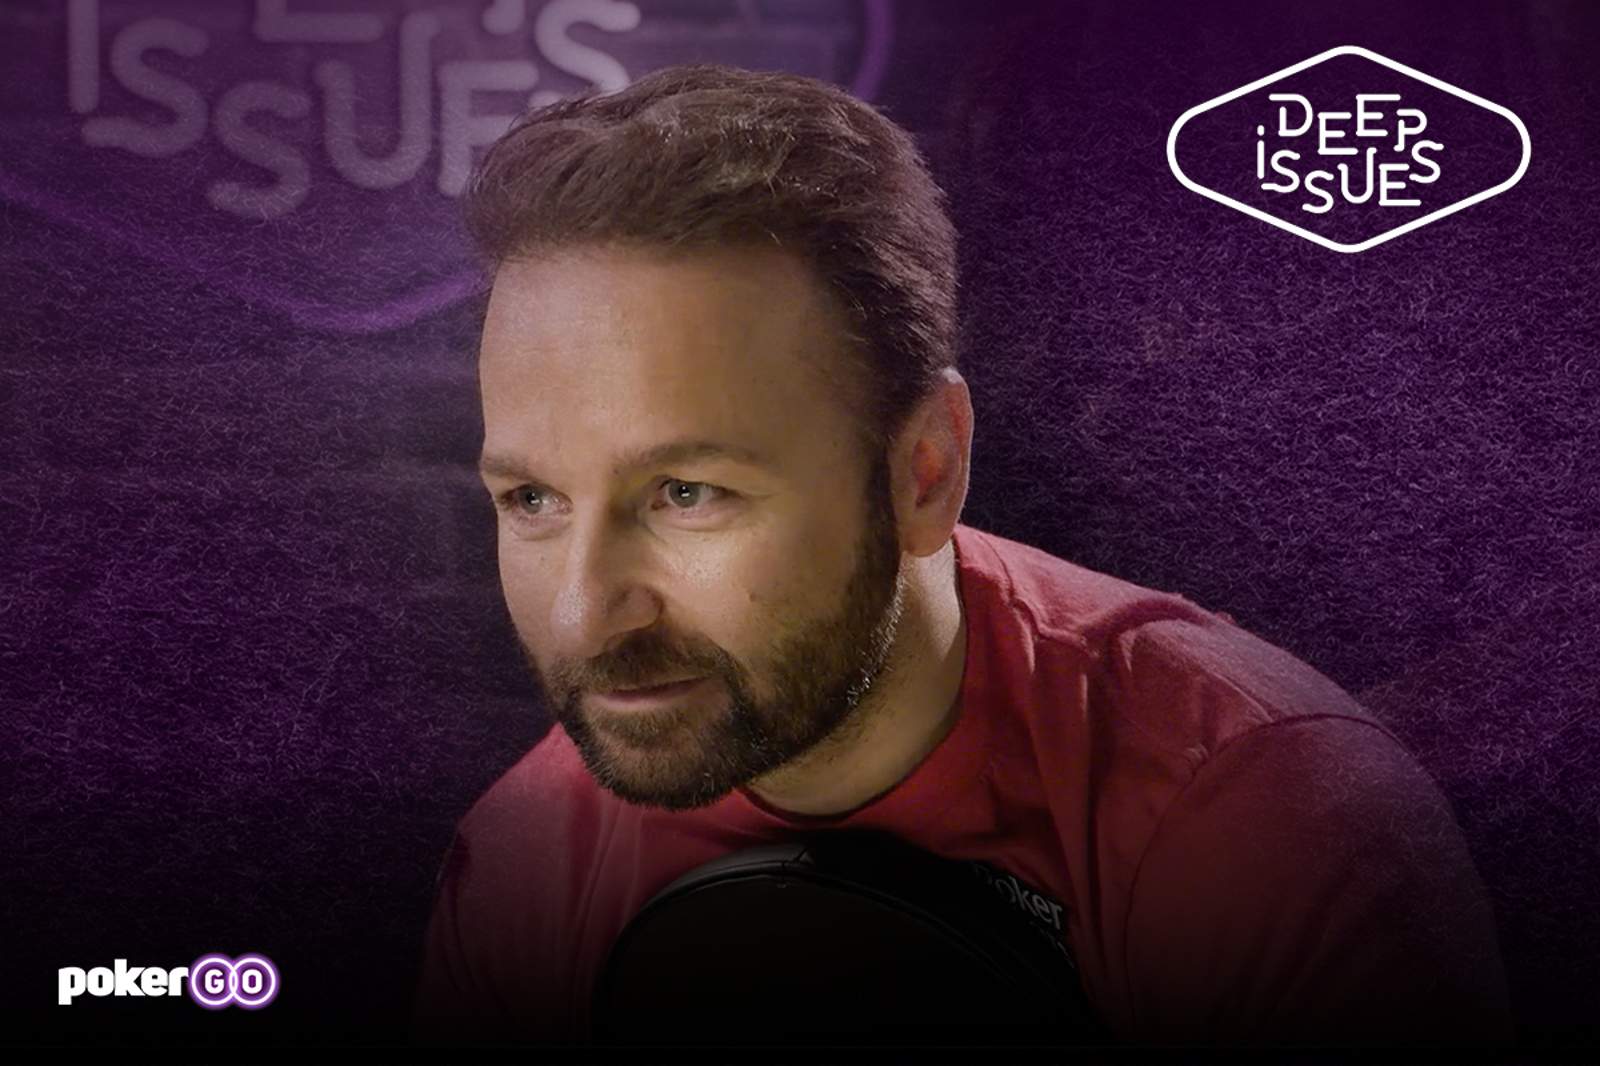 Wait, What? Daniel Negreanu Talks About Being Owed $10,000,000